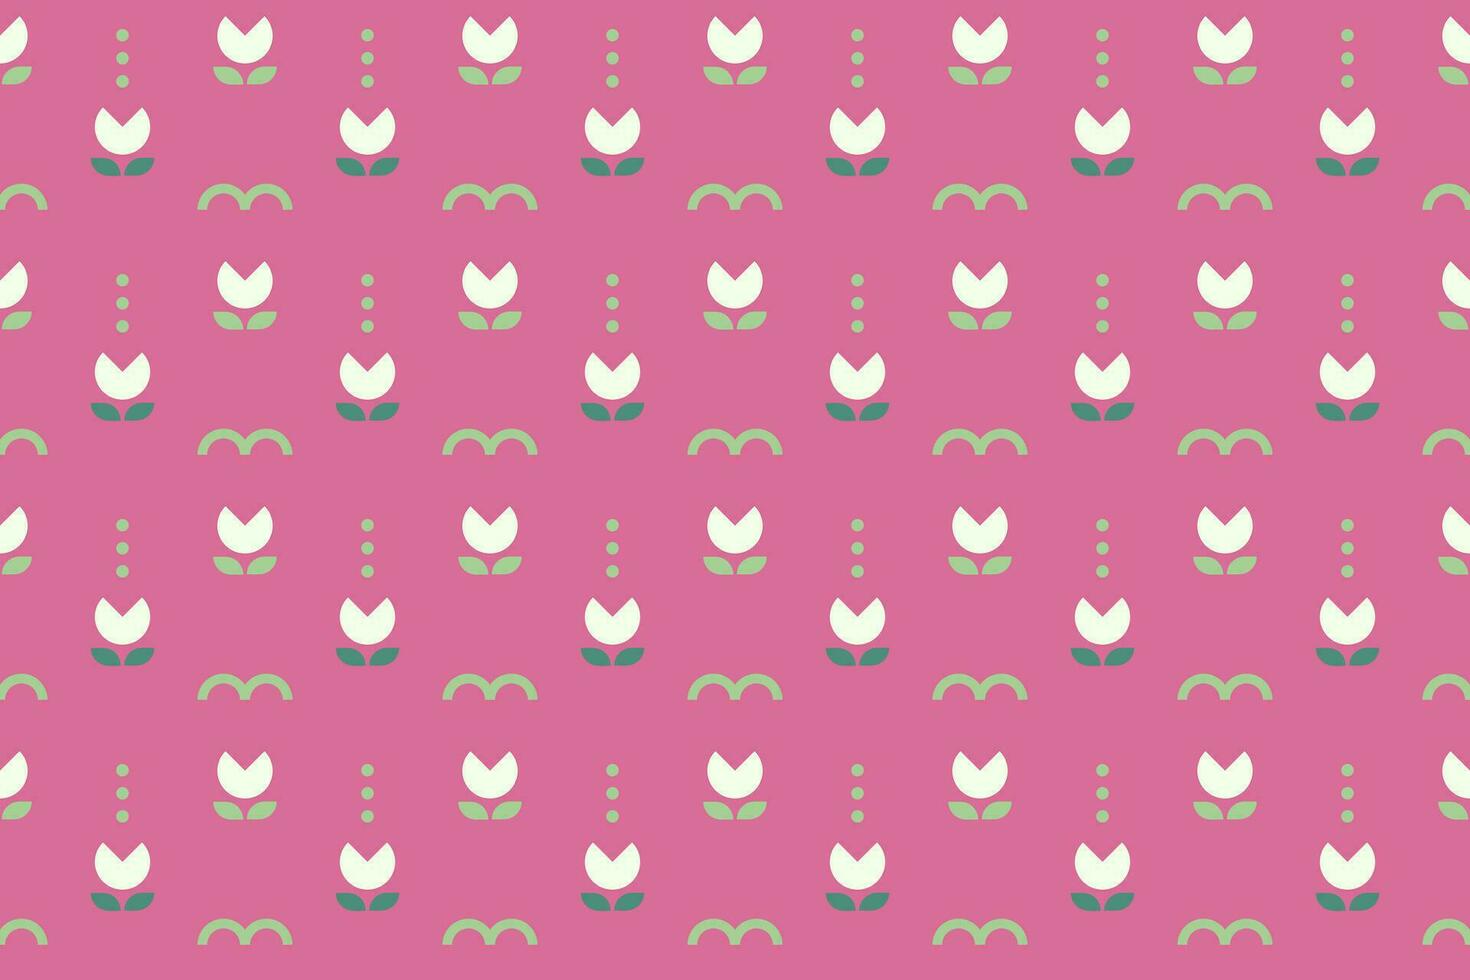 A lotus flower theme with geometric shape as seamless pattern background vector